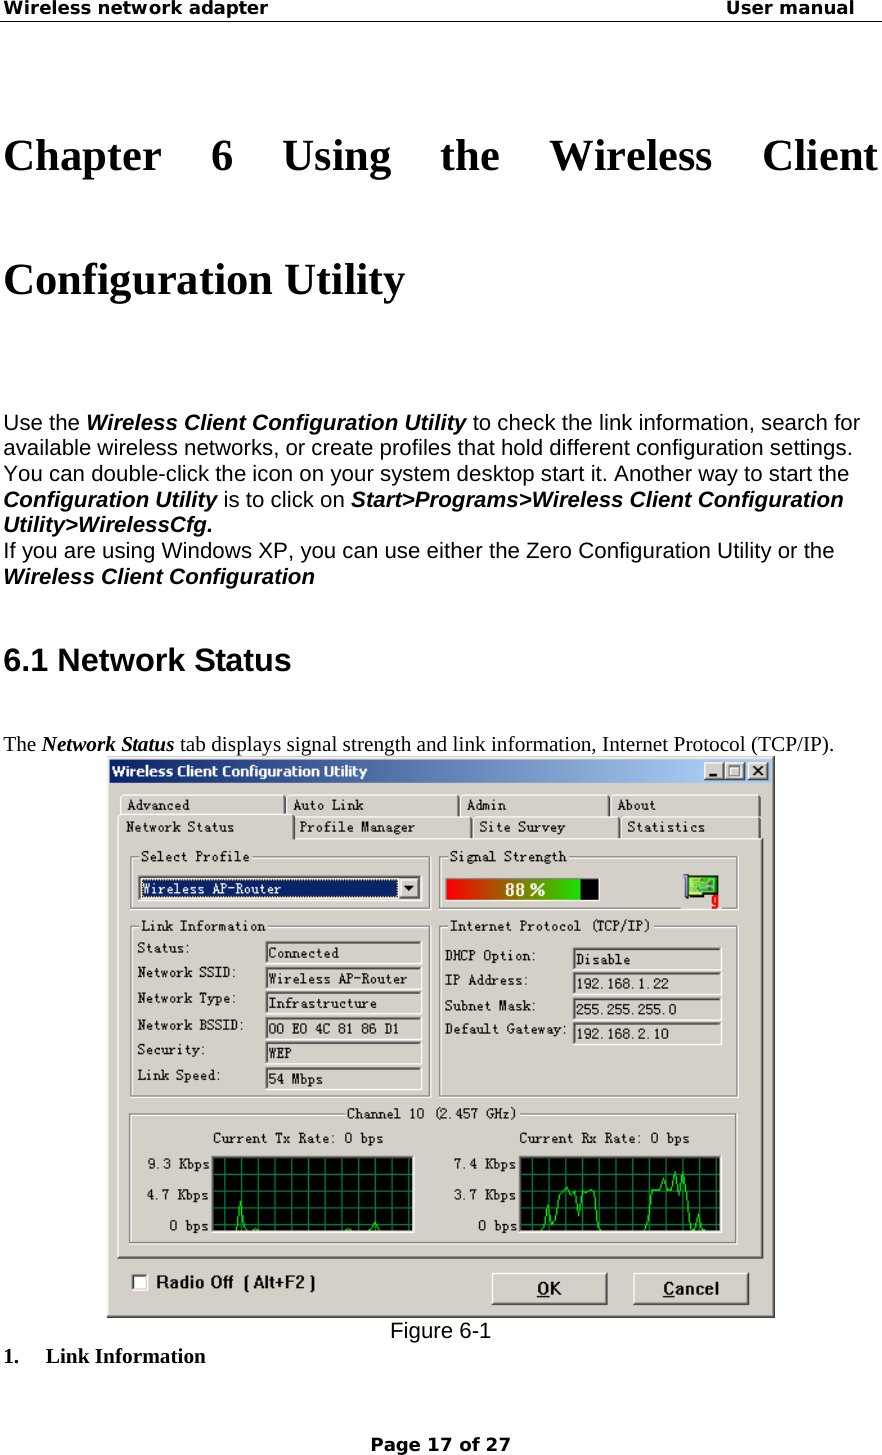 Wireless network adapter                                                  User manual Page 17 of 27  Chapter 6 Using the Wireless Client Configuration Utility Use the Wireless Client Configuration Utility to check the link information, search for available wireless networks, or create profiles that hold different configuration settings. You can double-click the icon on your system desktop start it. Another way to start the Configuration Utility is to click on Start&gt;Programs&gt;Wireless Client Configuration Utility&gt;WirelessCfg. If you are using Windows XP, you can use either the Zero Configuration Utility or the Wireless Client Configuration  6.1 Network Status The Network Status tab displays signal strength and link information, Internet Protocol (TCP/IP).    Figure 6-1 1. Link Information   